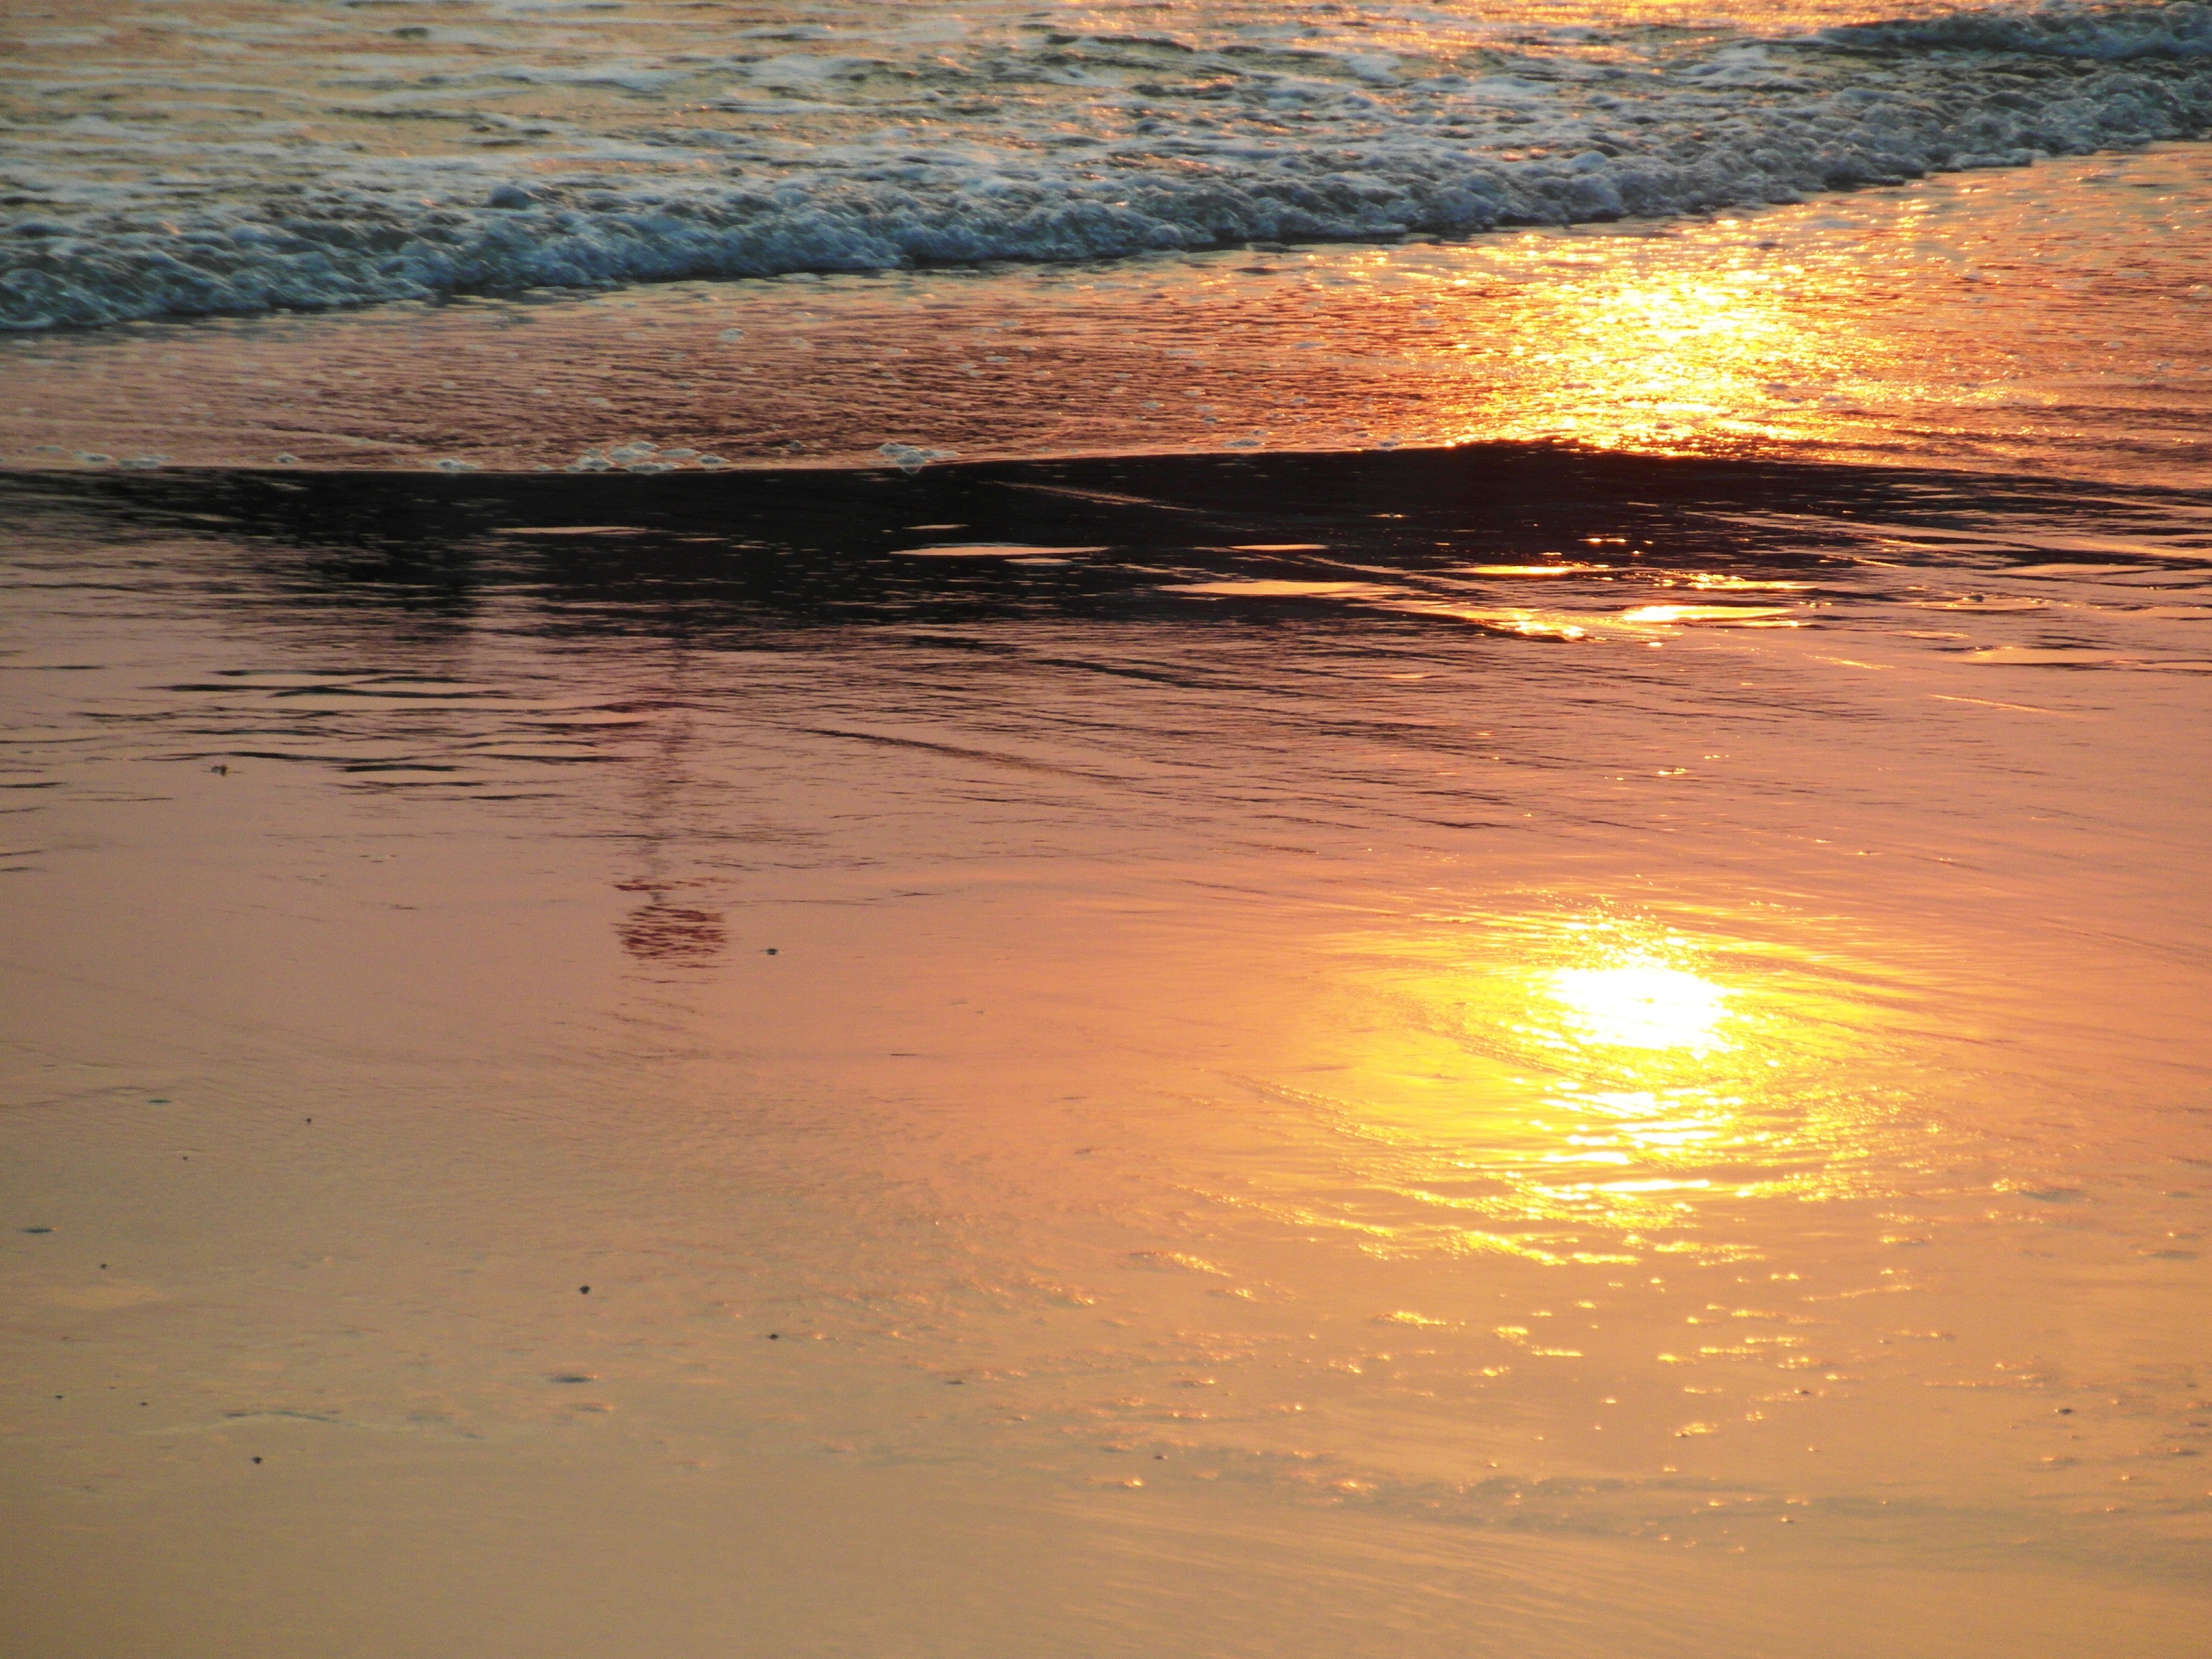 Sunset reflection in the sand photo